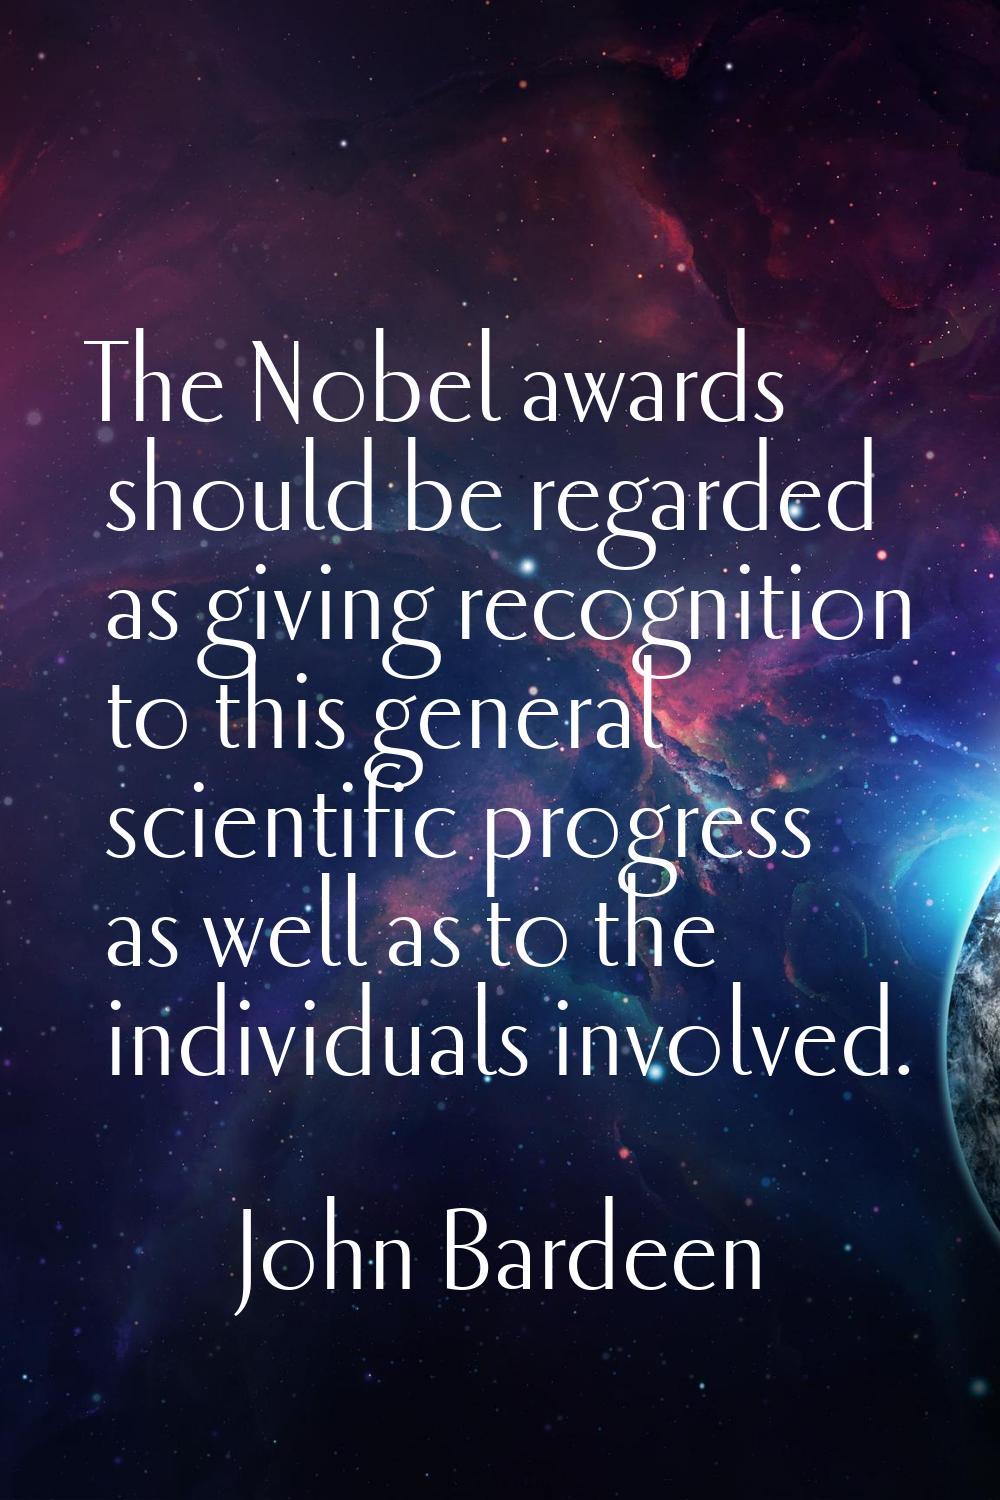 The Nobel awards should be regarded as giving recognition to this general scientific progress as we